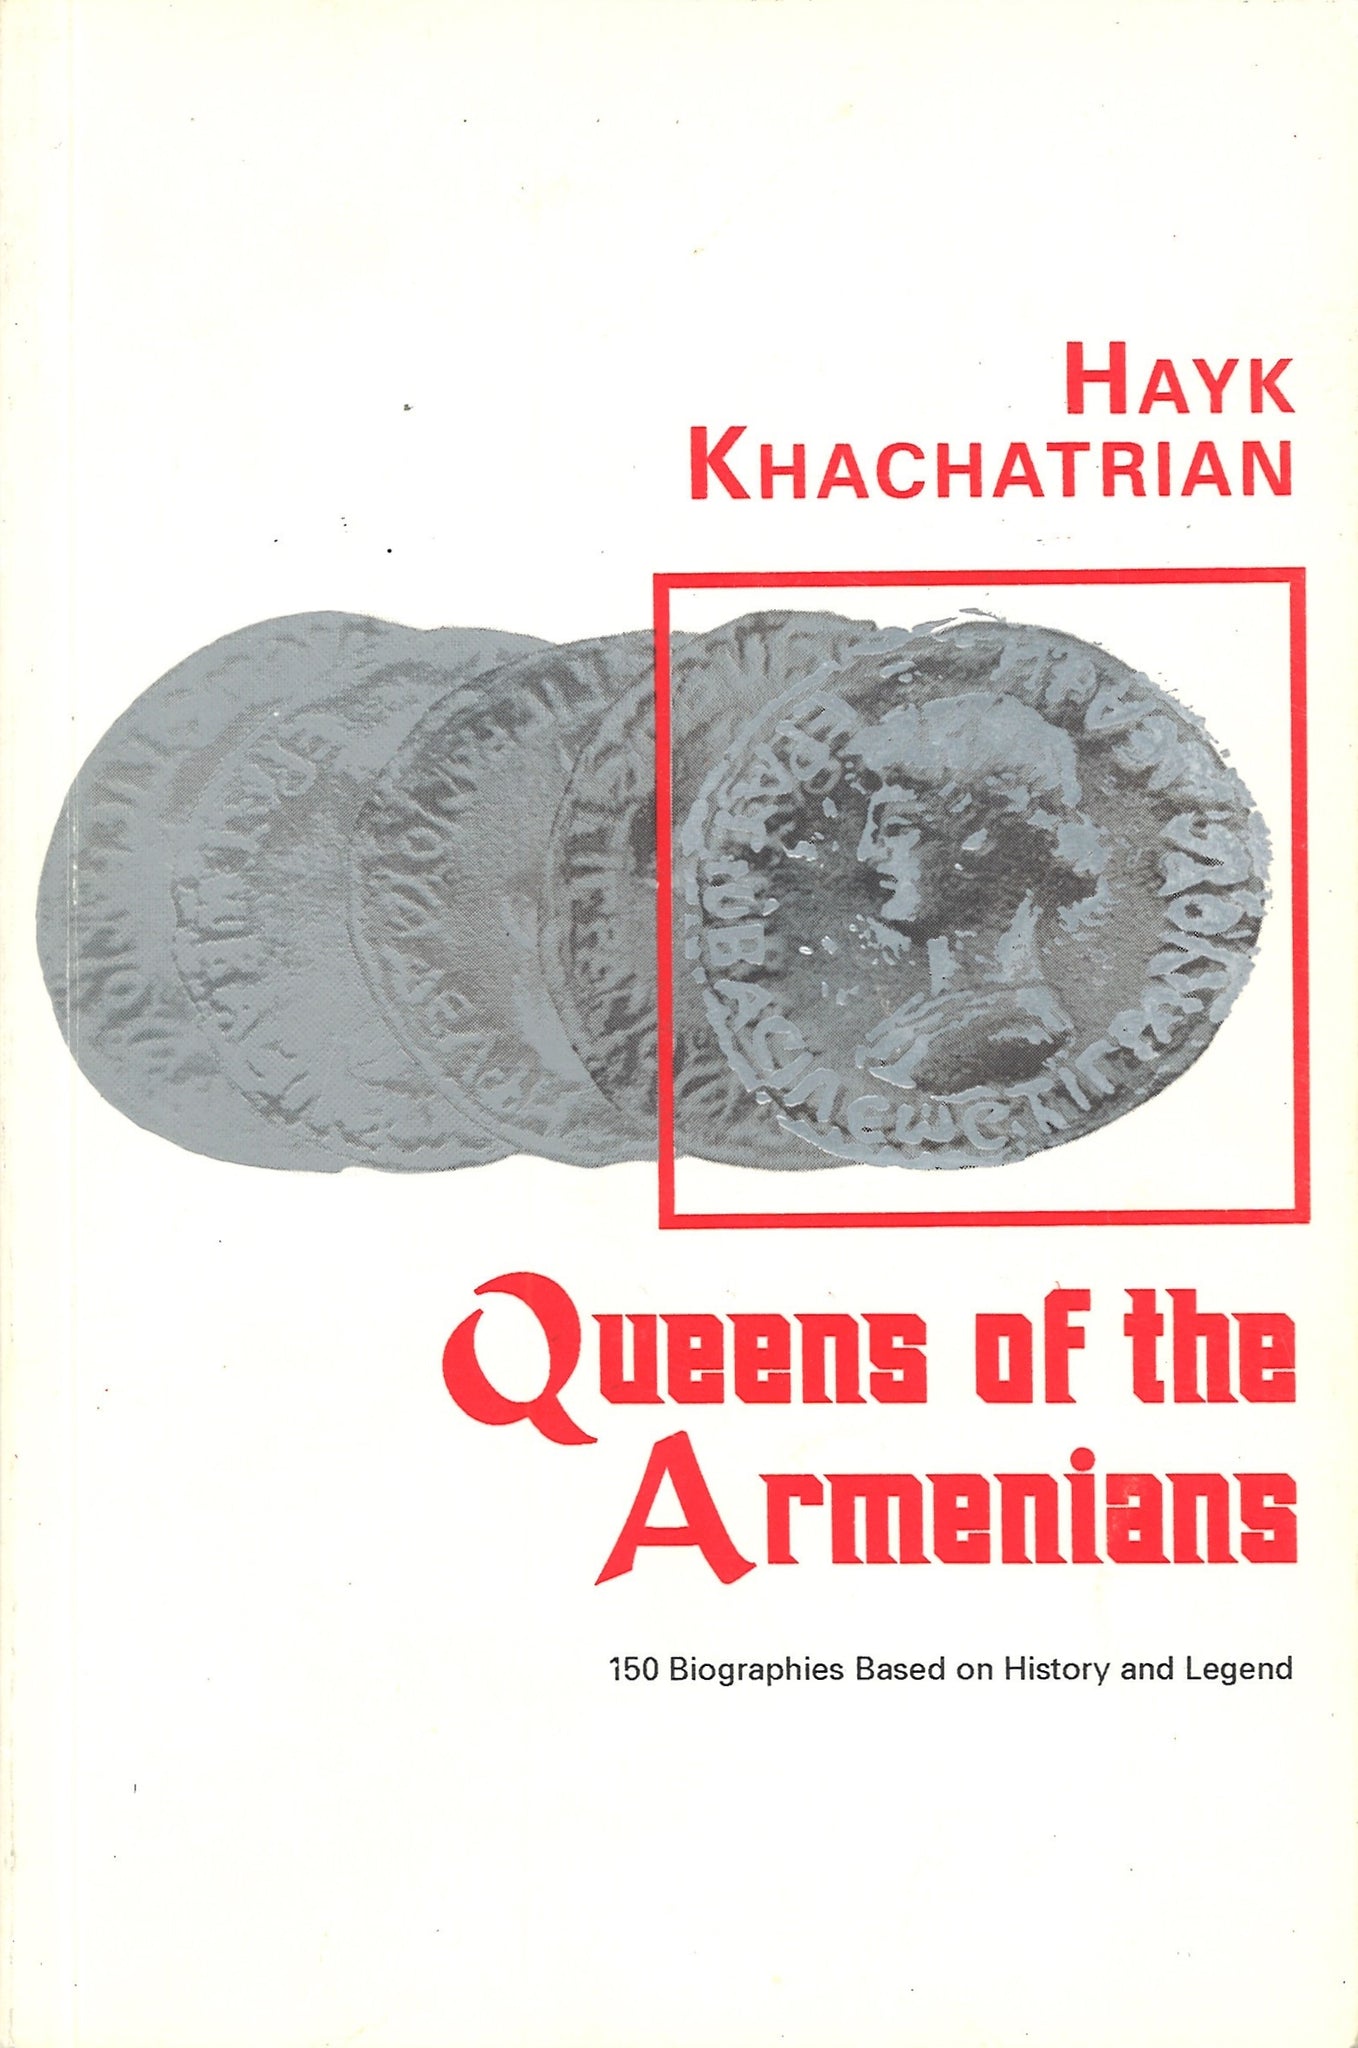 QUEENS OF THE ARMENIANS: 150 Biographies Based on History and Legends